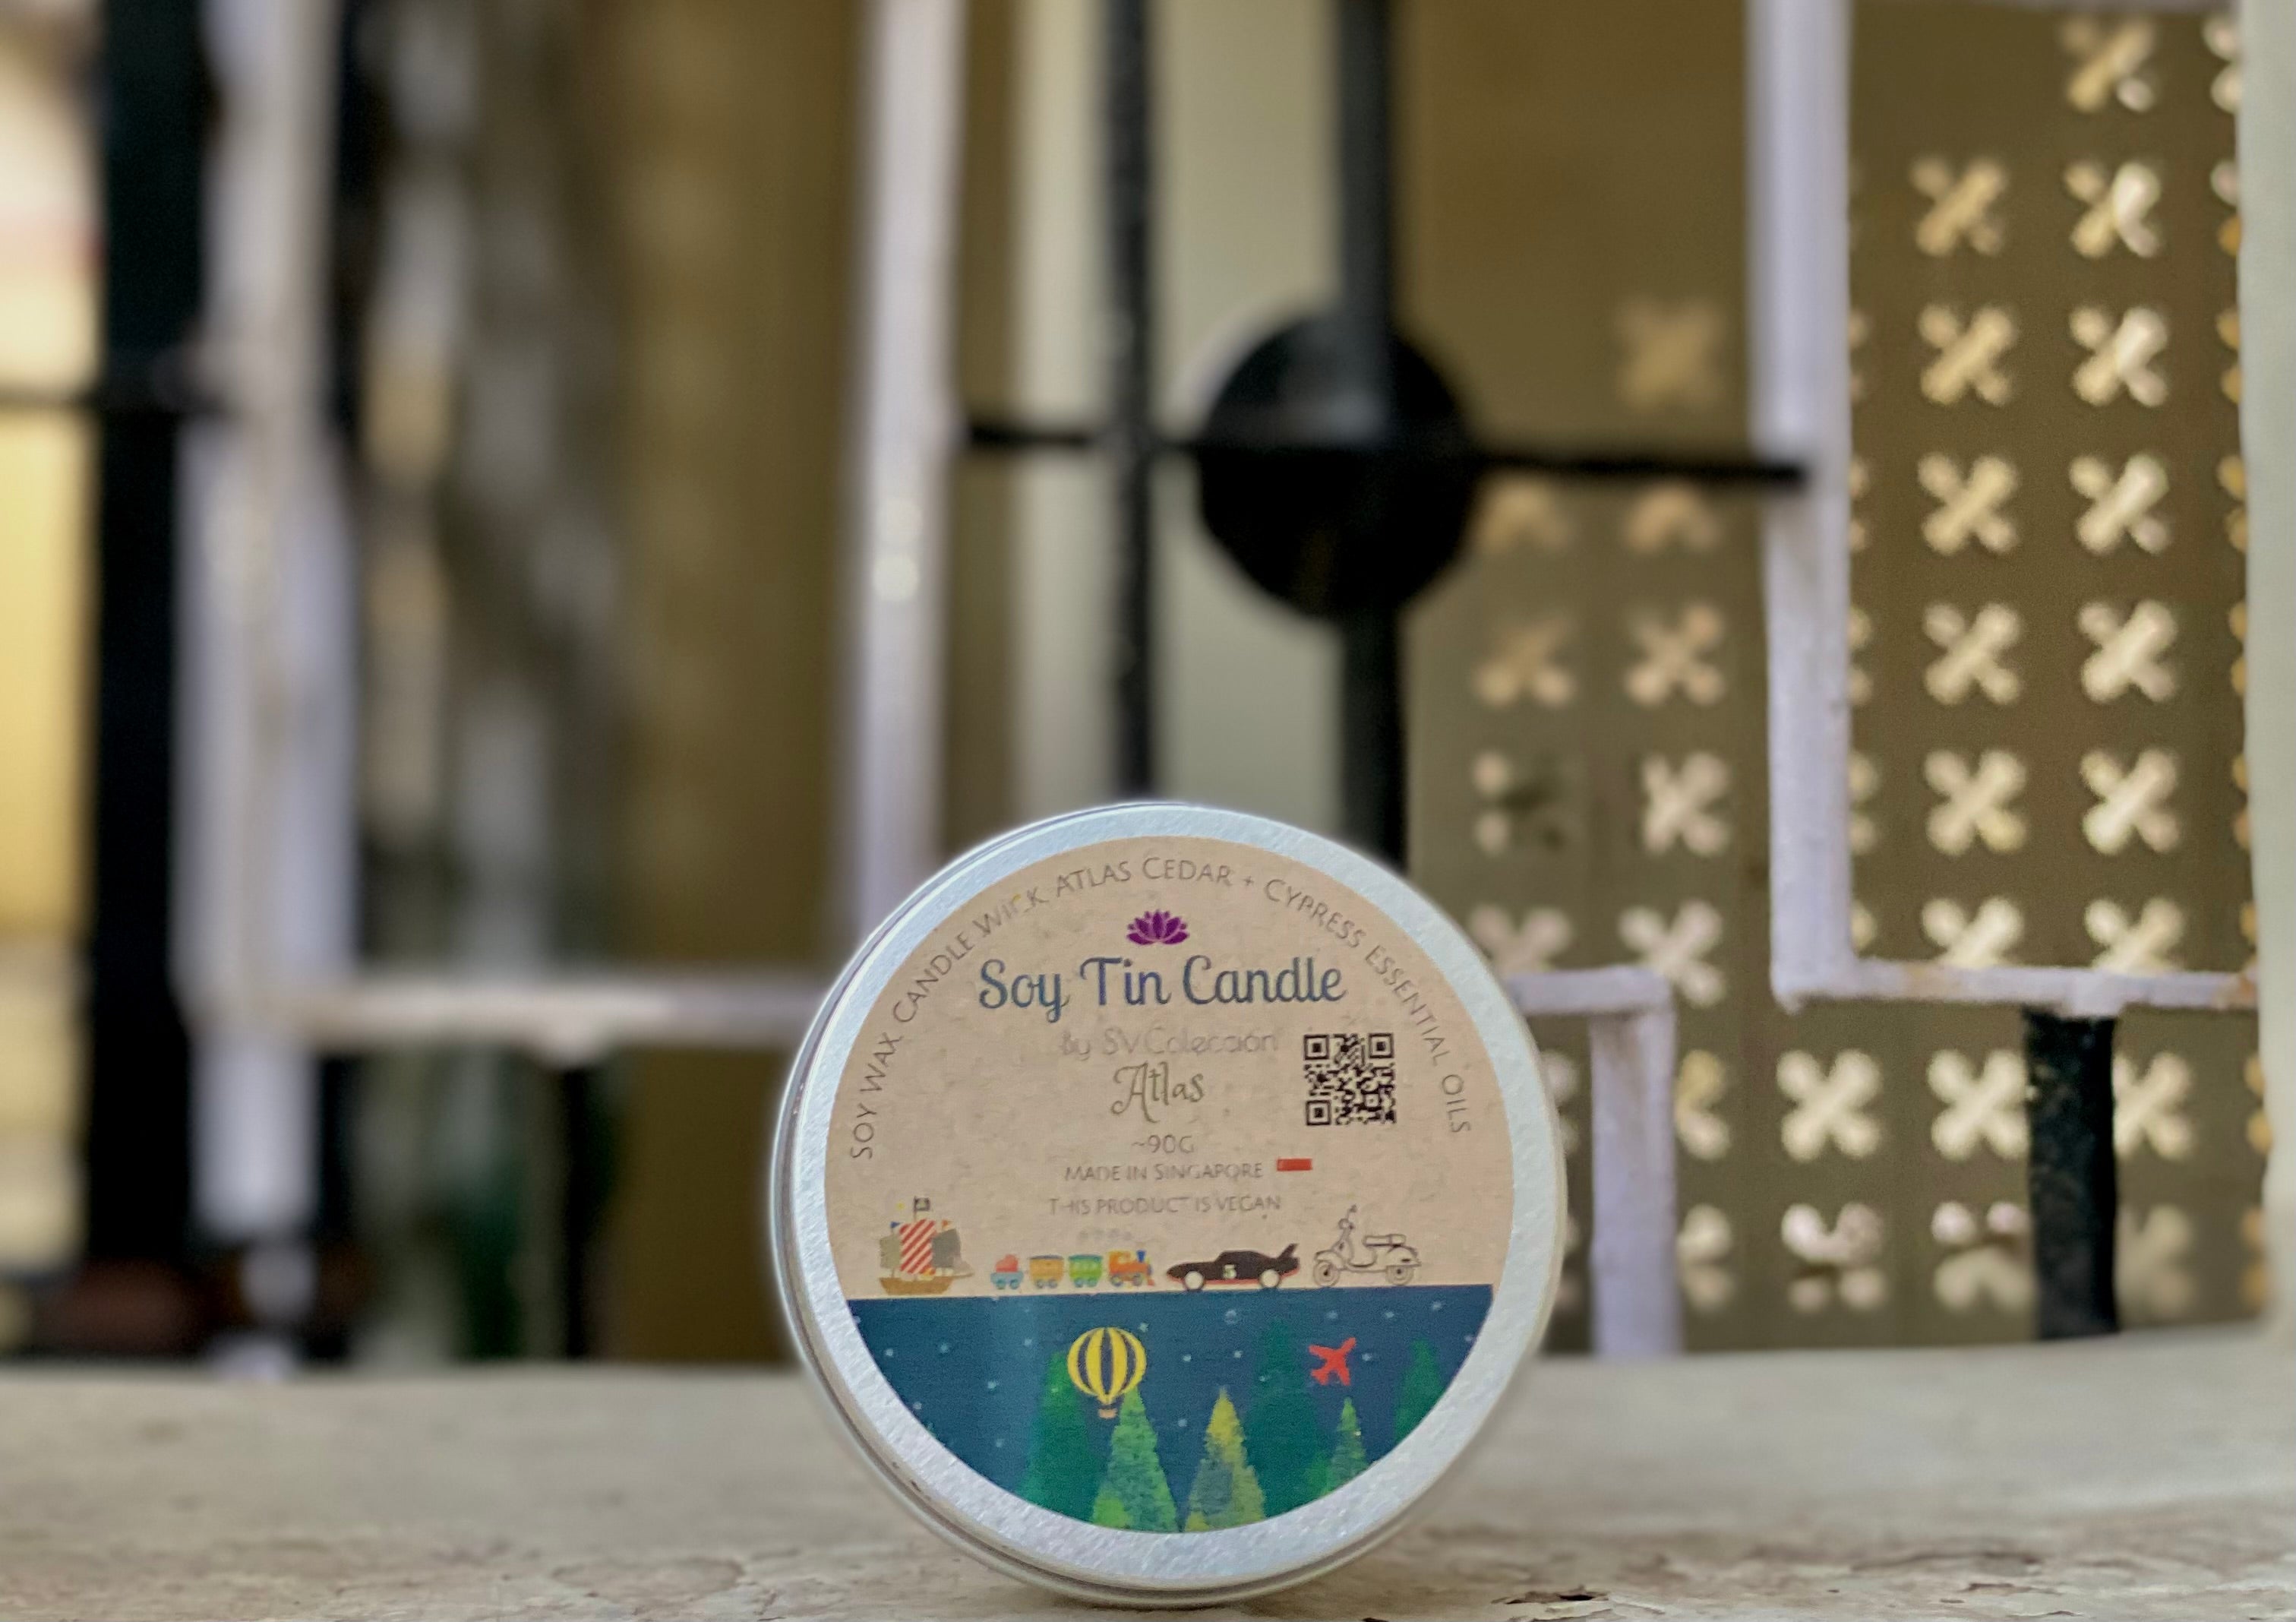 Atlas - a Soy Tin Candle, made with care and only vegan products